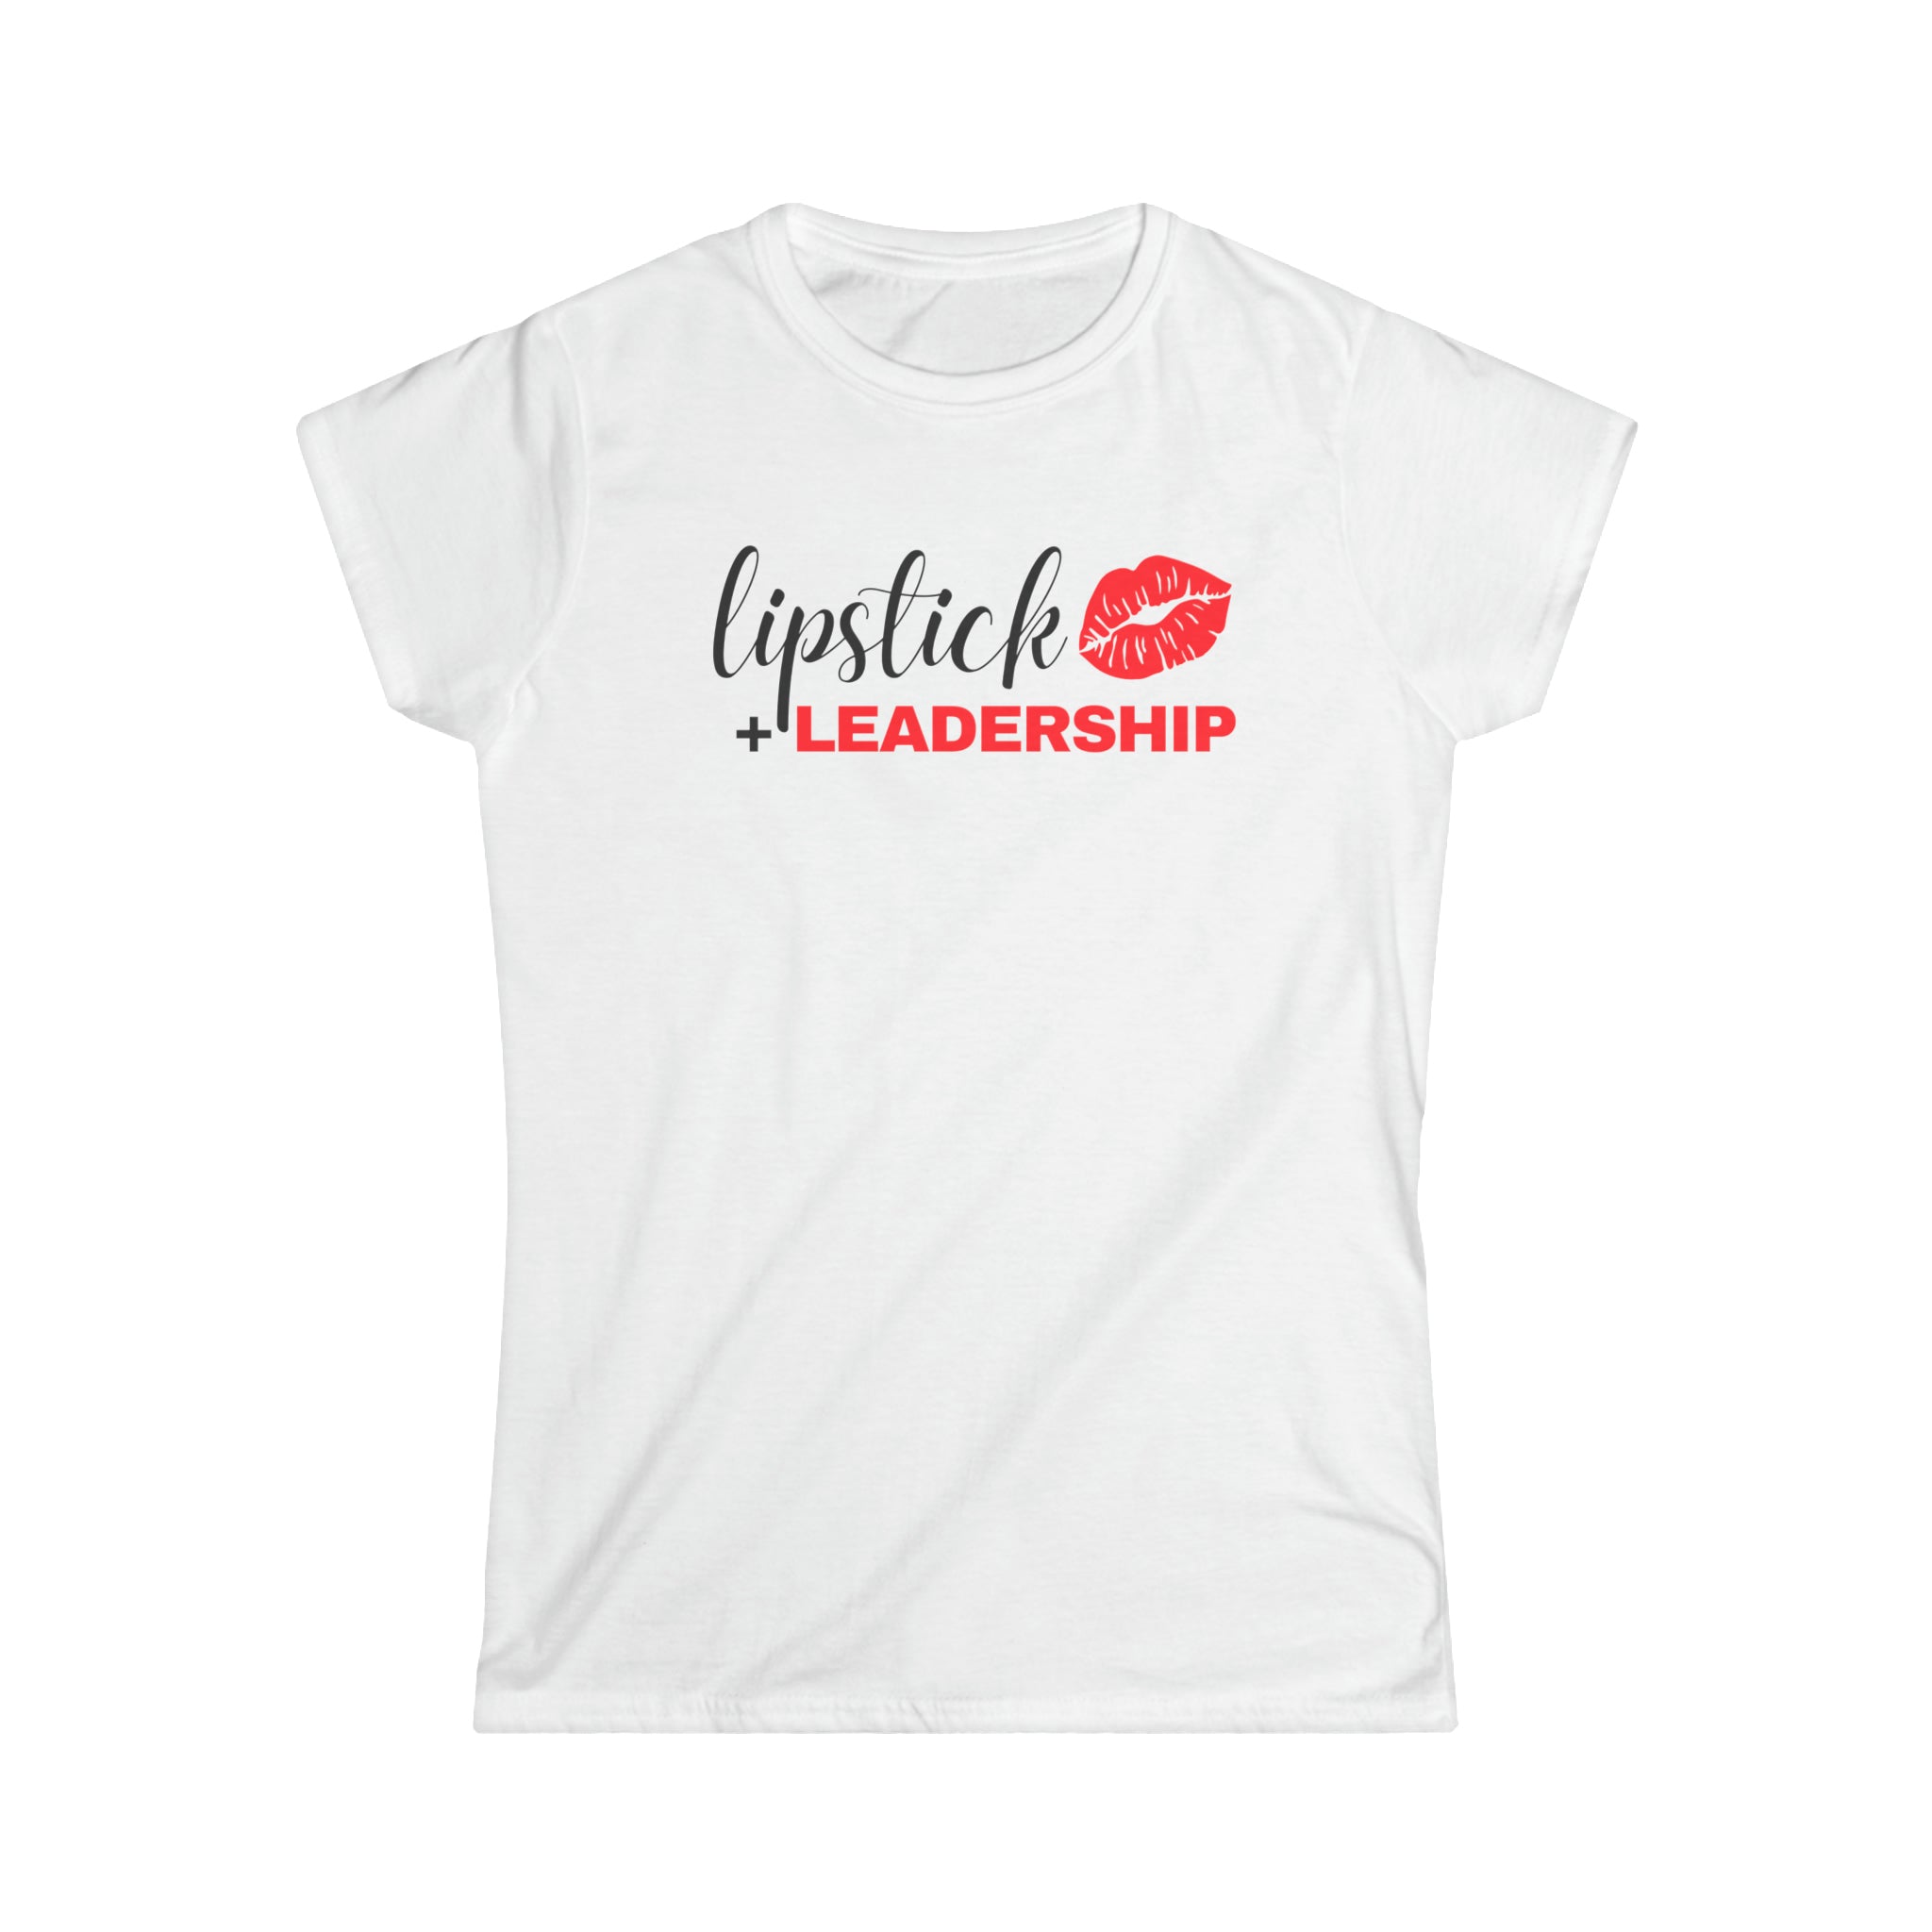 Lipstick + Leadership (Red Lips) Women's Softstyle Tee, Makeup Tshirt, Beauty Business Tshirt T-Shirt White-2XL The Middle Aged Groove